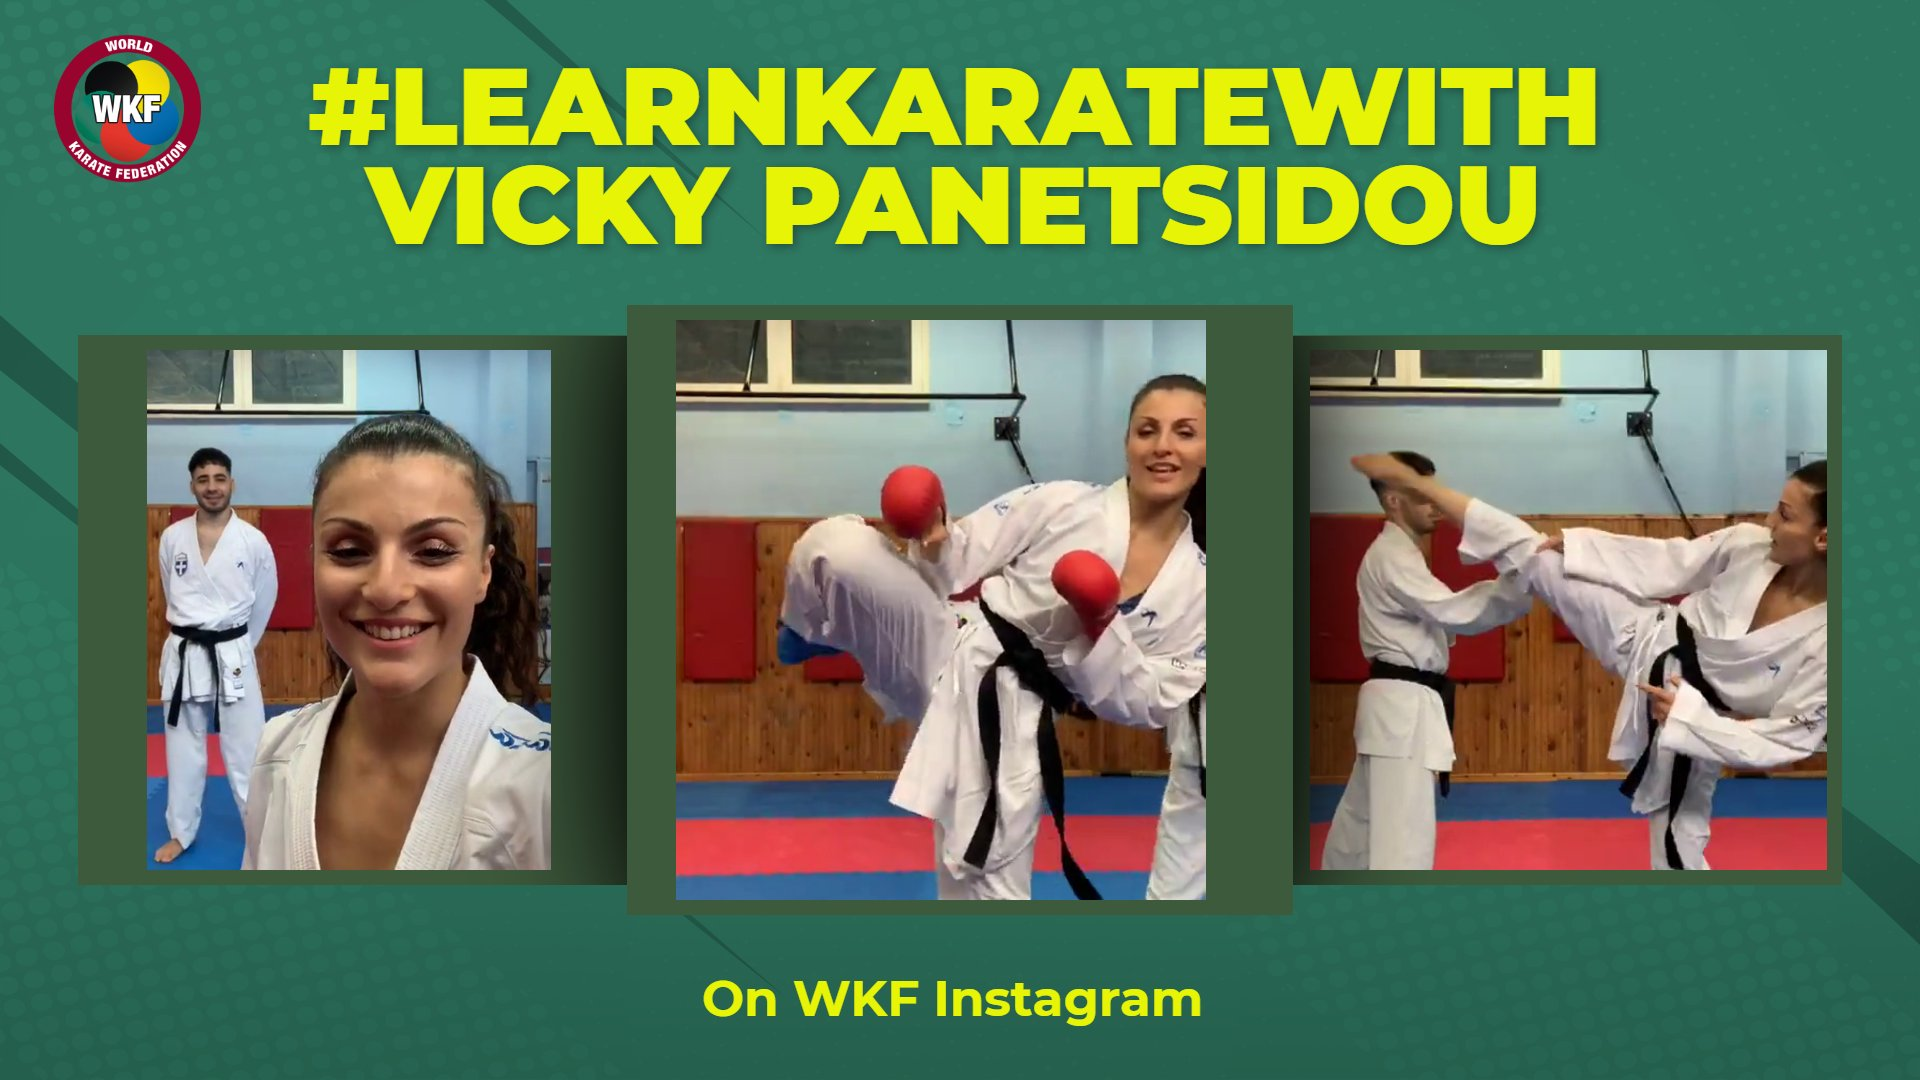 Vicky Panetsidou has become the fifth athlete to lead an online karate session ©WKF